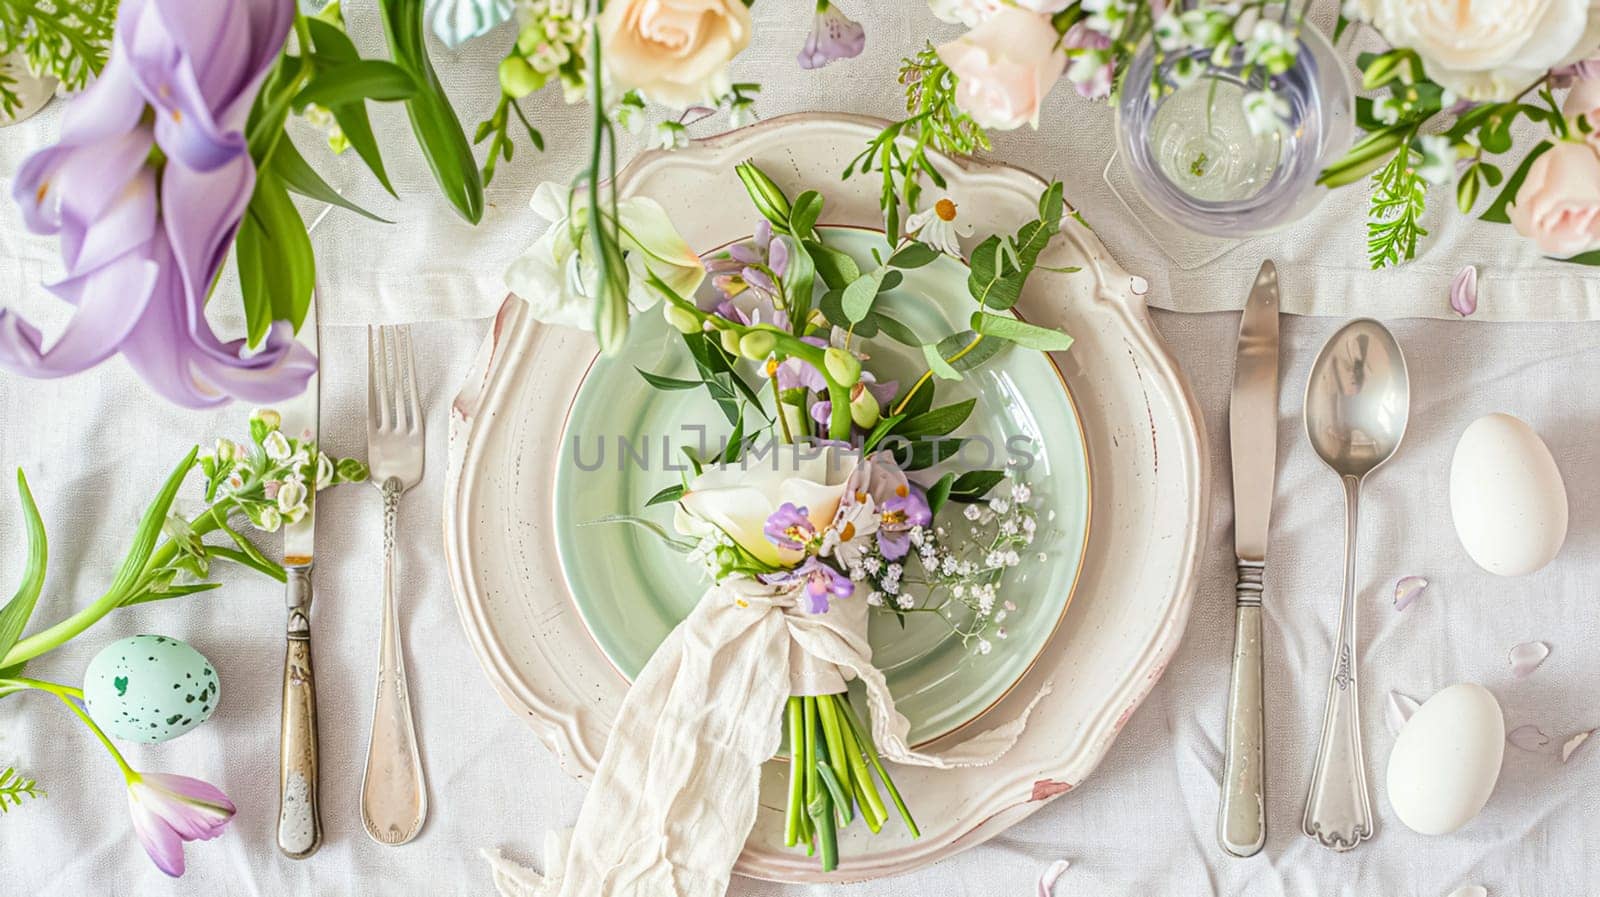 Easter table setting with painted eggs, spring flowers and crockery by Olayola